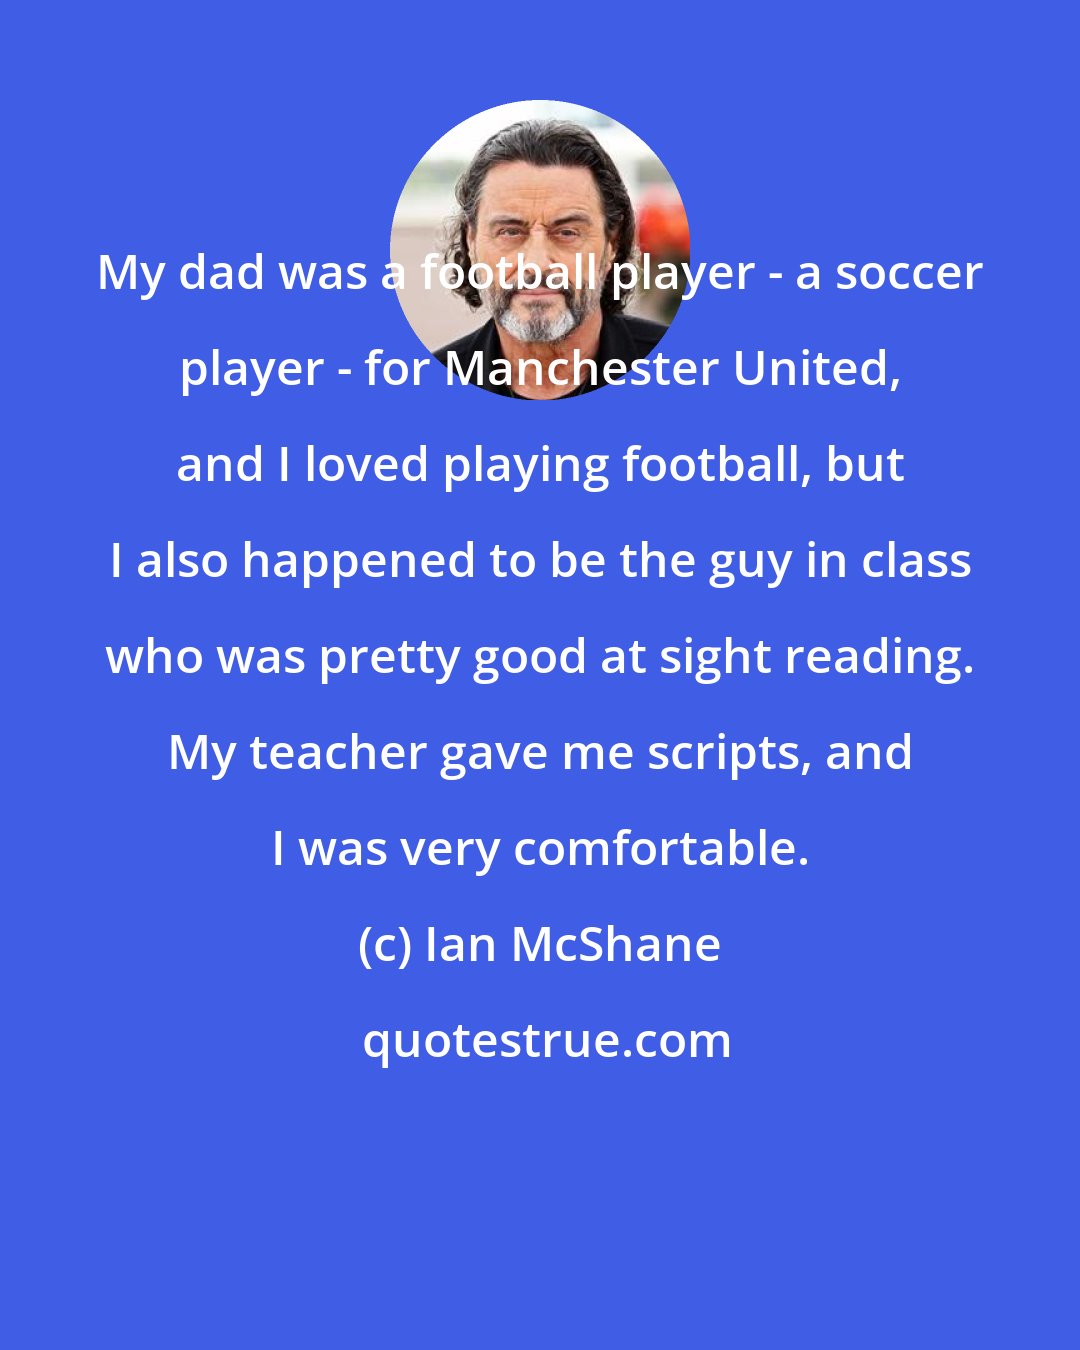 Ian McShane: My dad was a football player - a soccer player - for Manchester United, and I loved playing football, but I also happened to be the guy in class who was pretty good at sight reading. My teacher gave me scripts, and I was very comfortable.